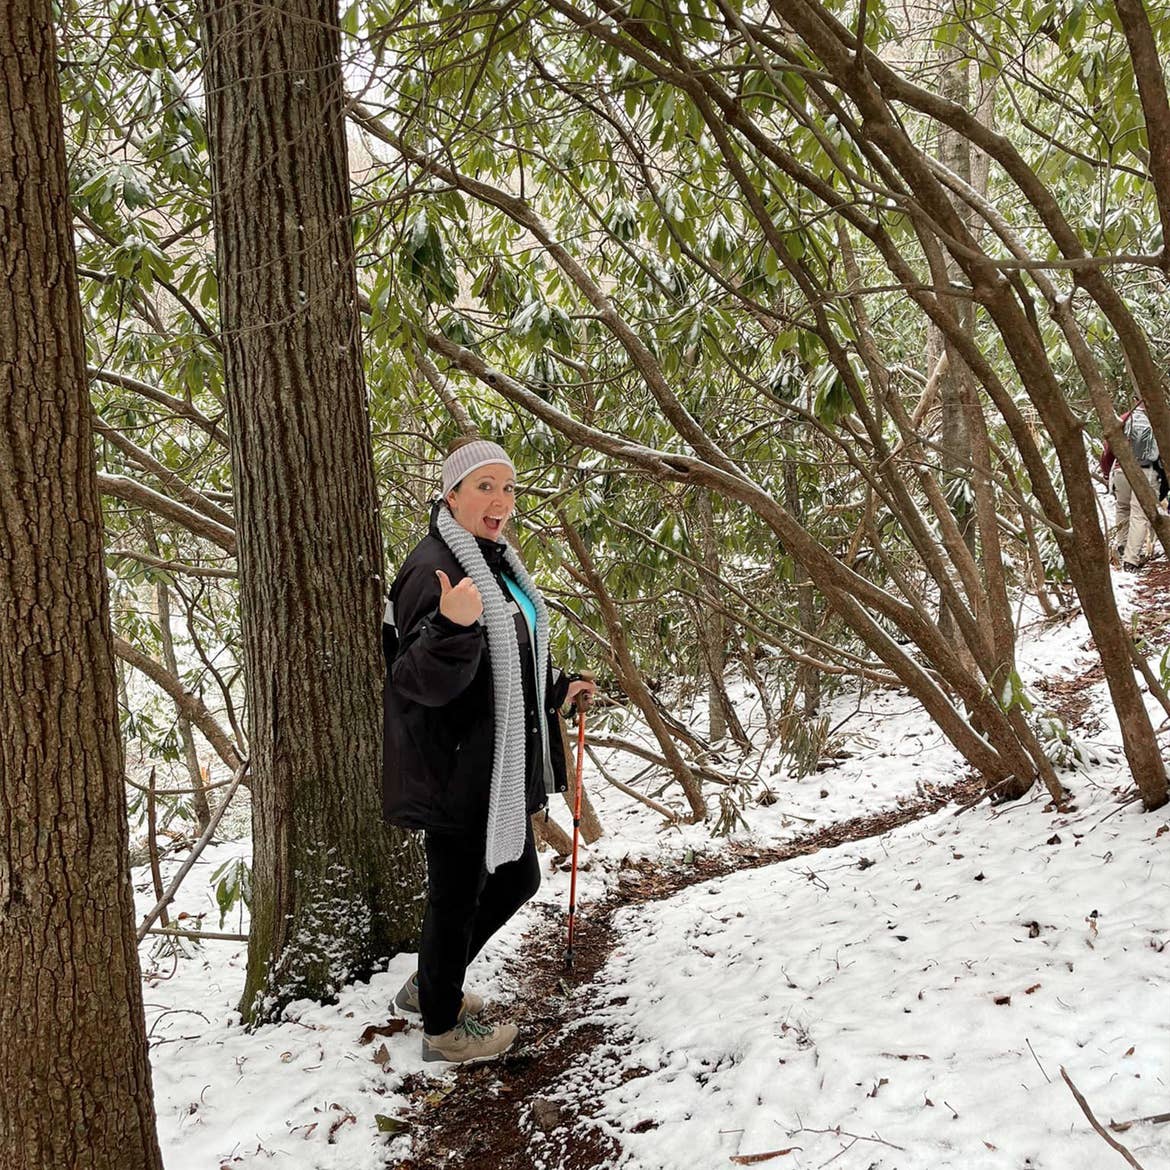 A woman wearing winter hiking apparel and holding a walking stick stands on a snowy, wooded trail.